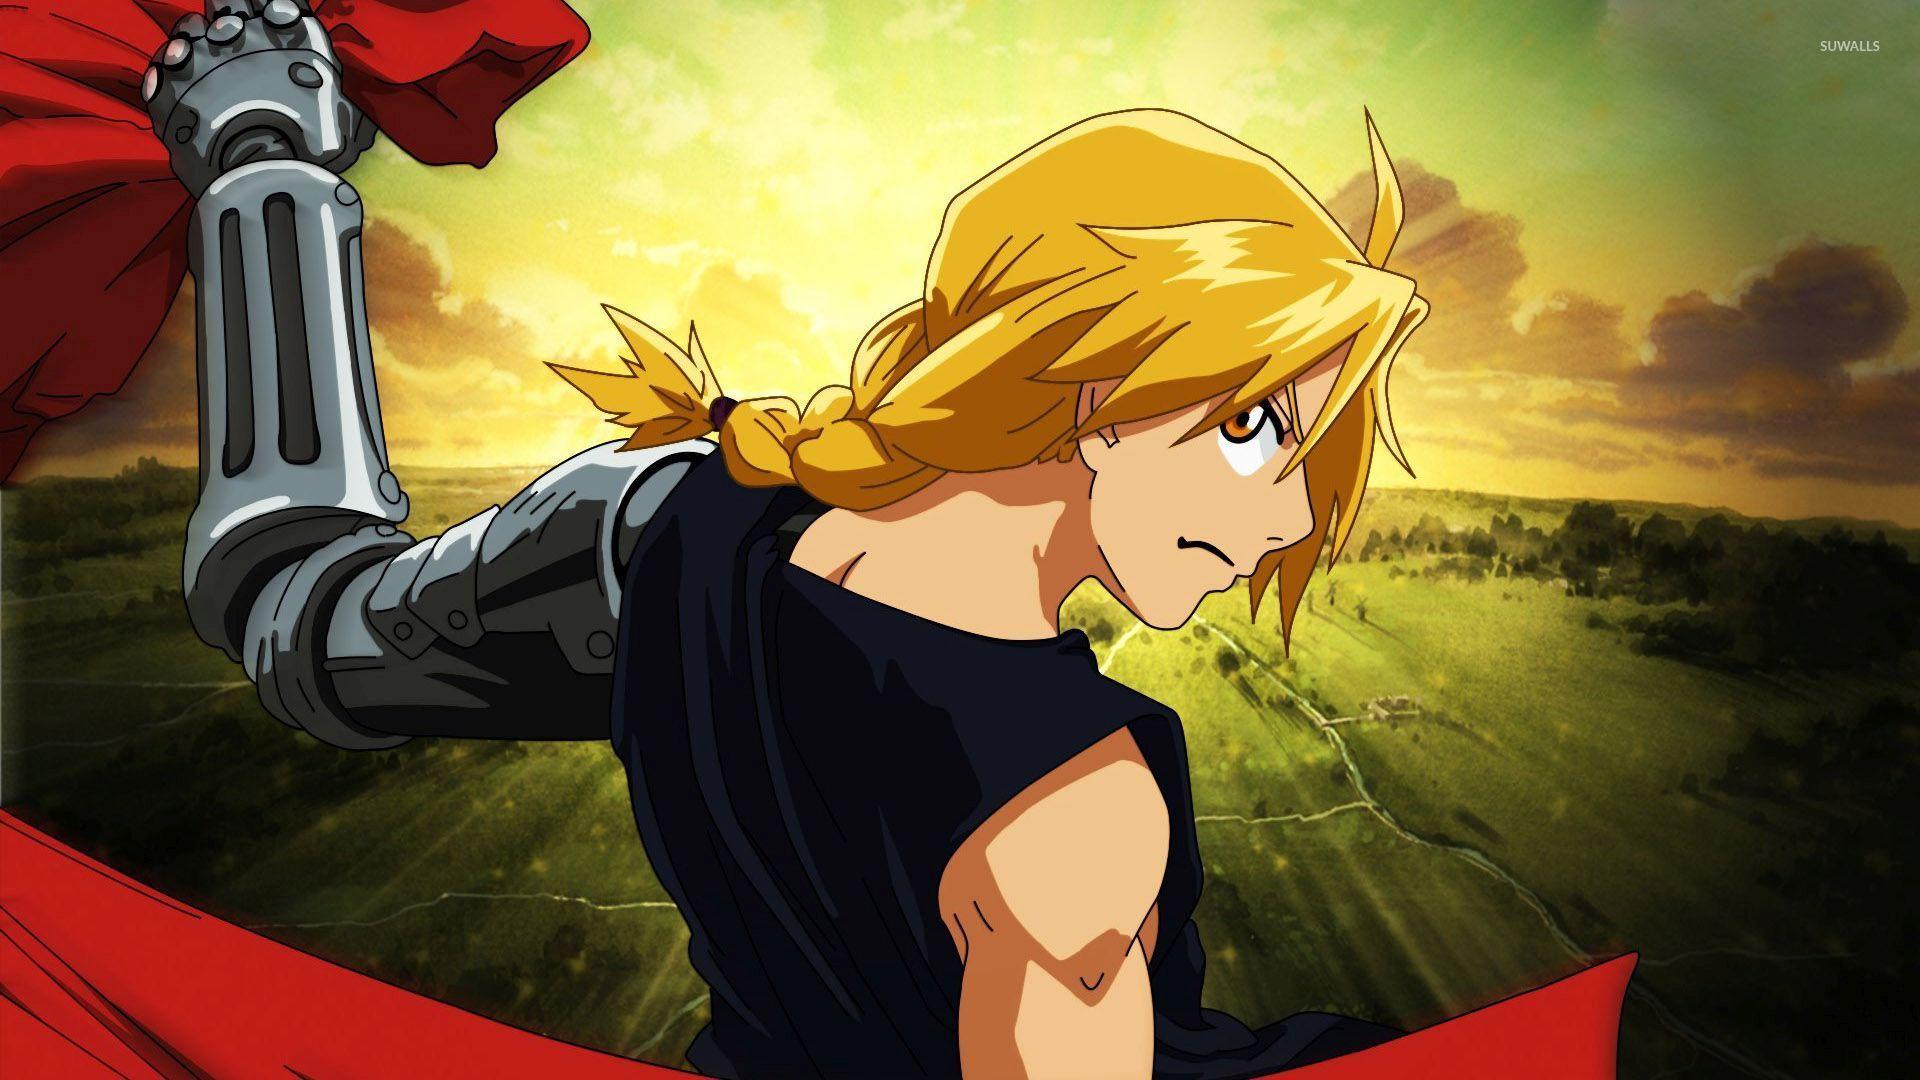 Edward Elric Fullmetal Alchemist wallpapers collection